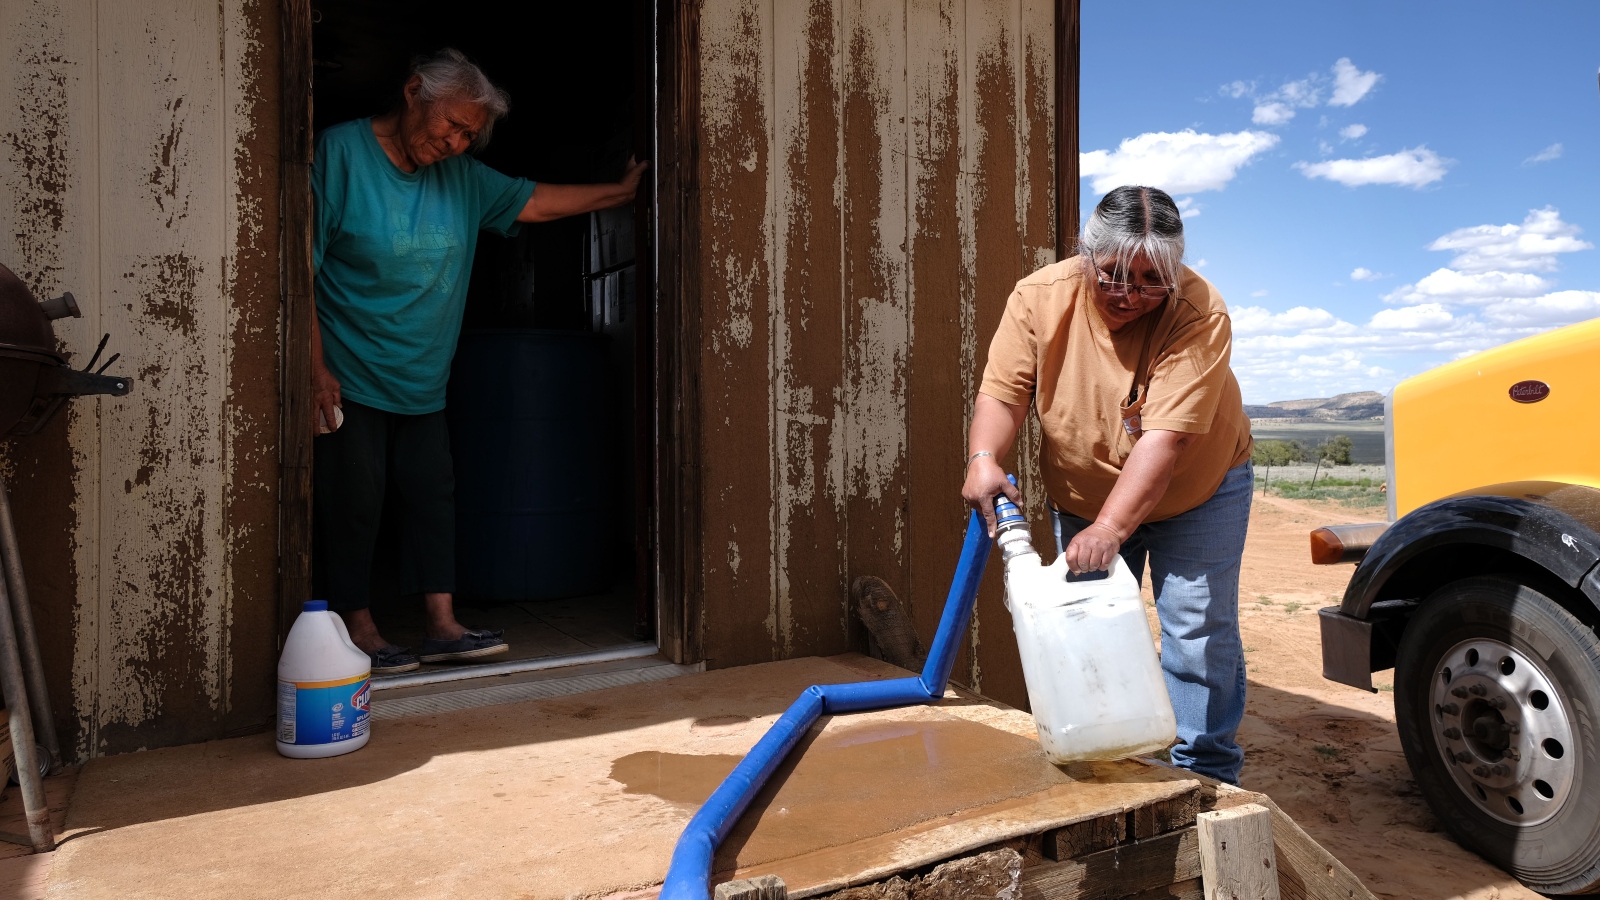 Nancy Bitsue, a member of the Navajo Nation, receives her monthly water delivery in the town of Thoreau, New Mexico. Due to disputed water rights and other factors, up to 40 percent of Navajo Nation households don’t have clean running water.